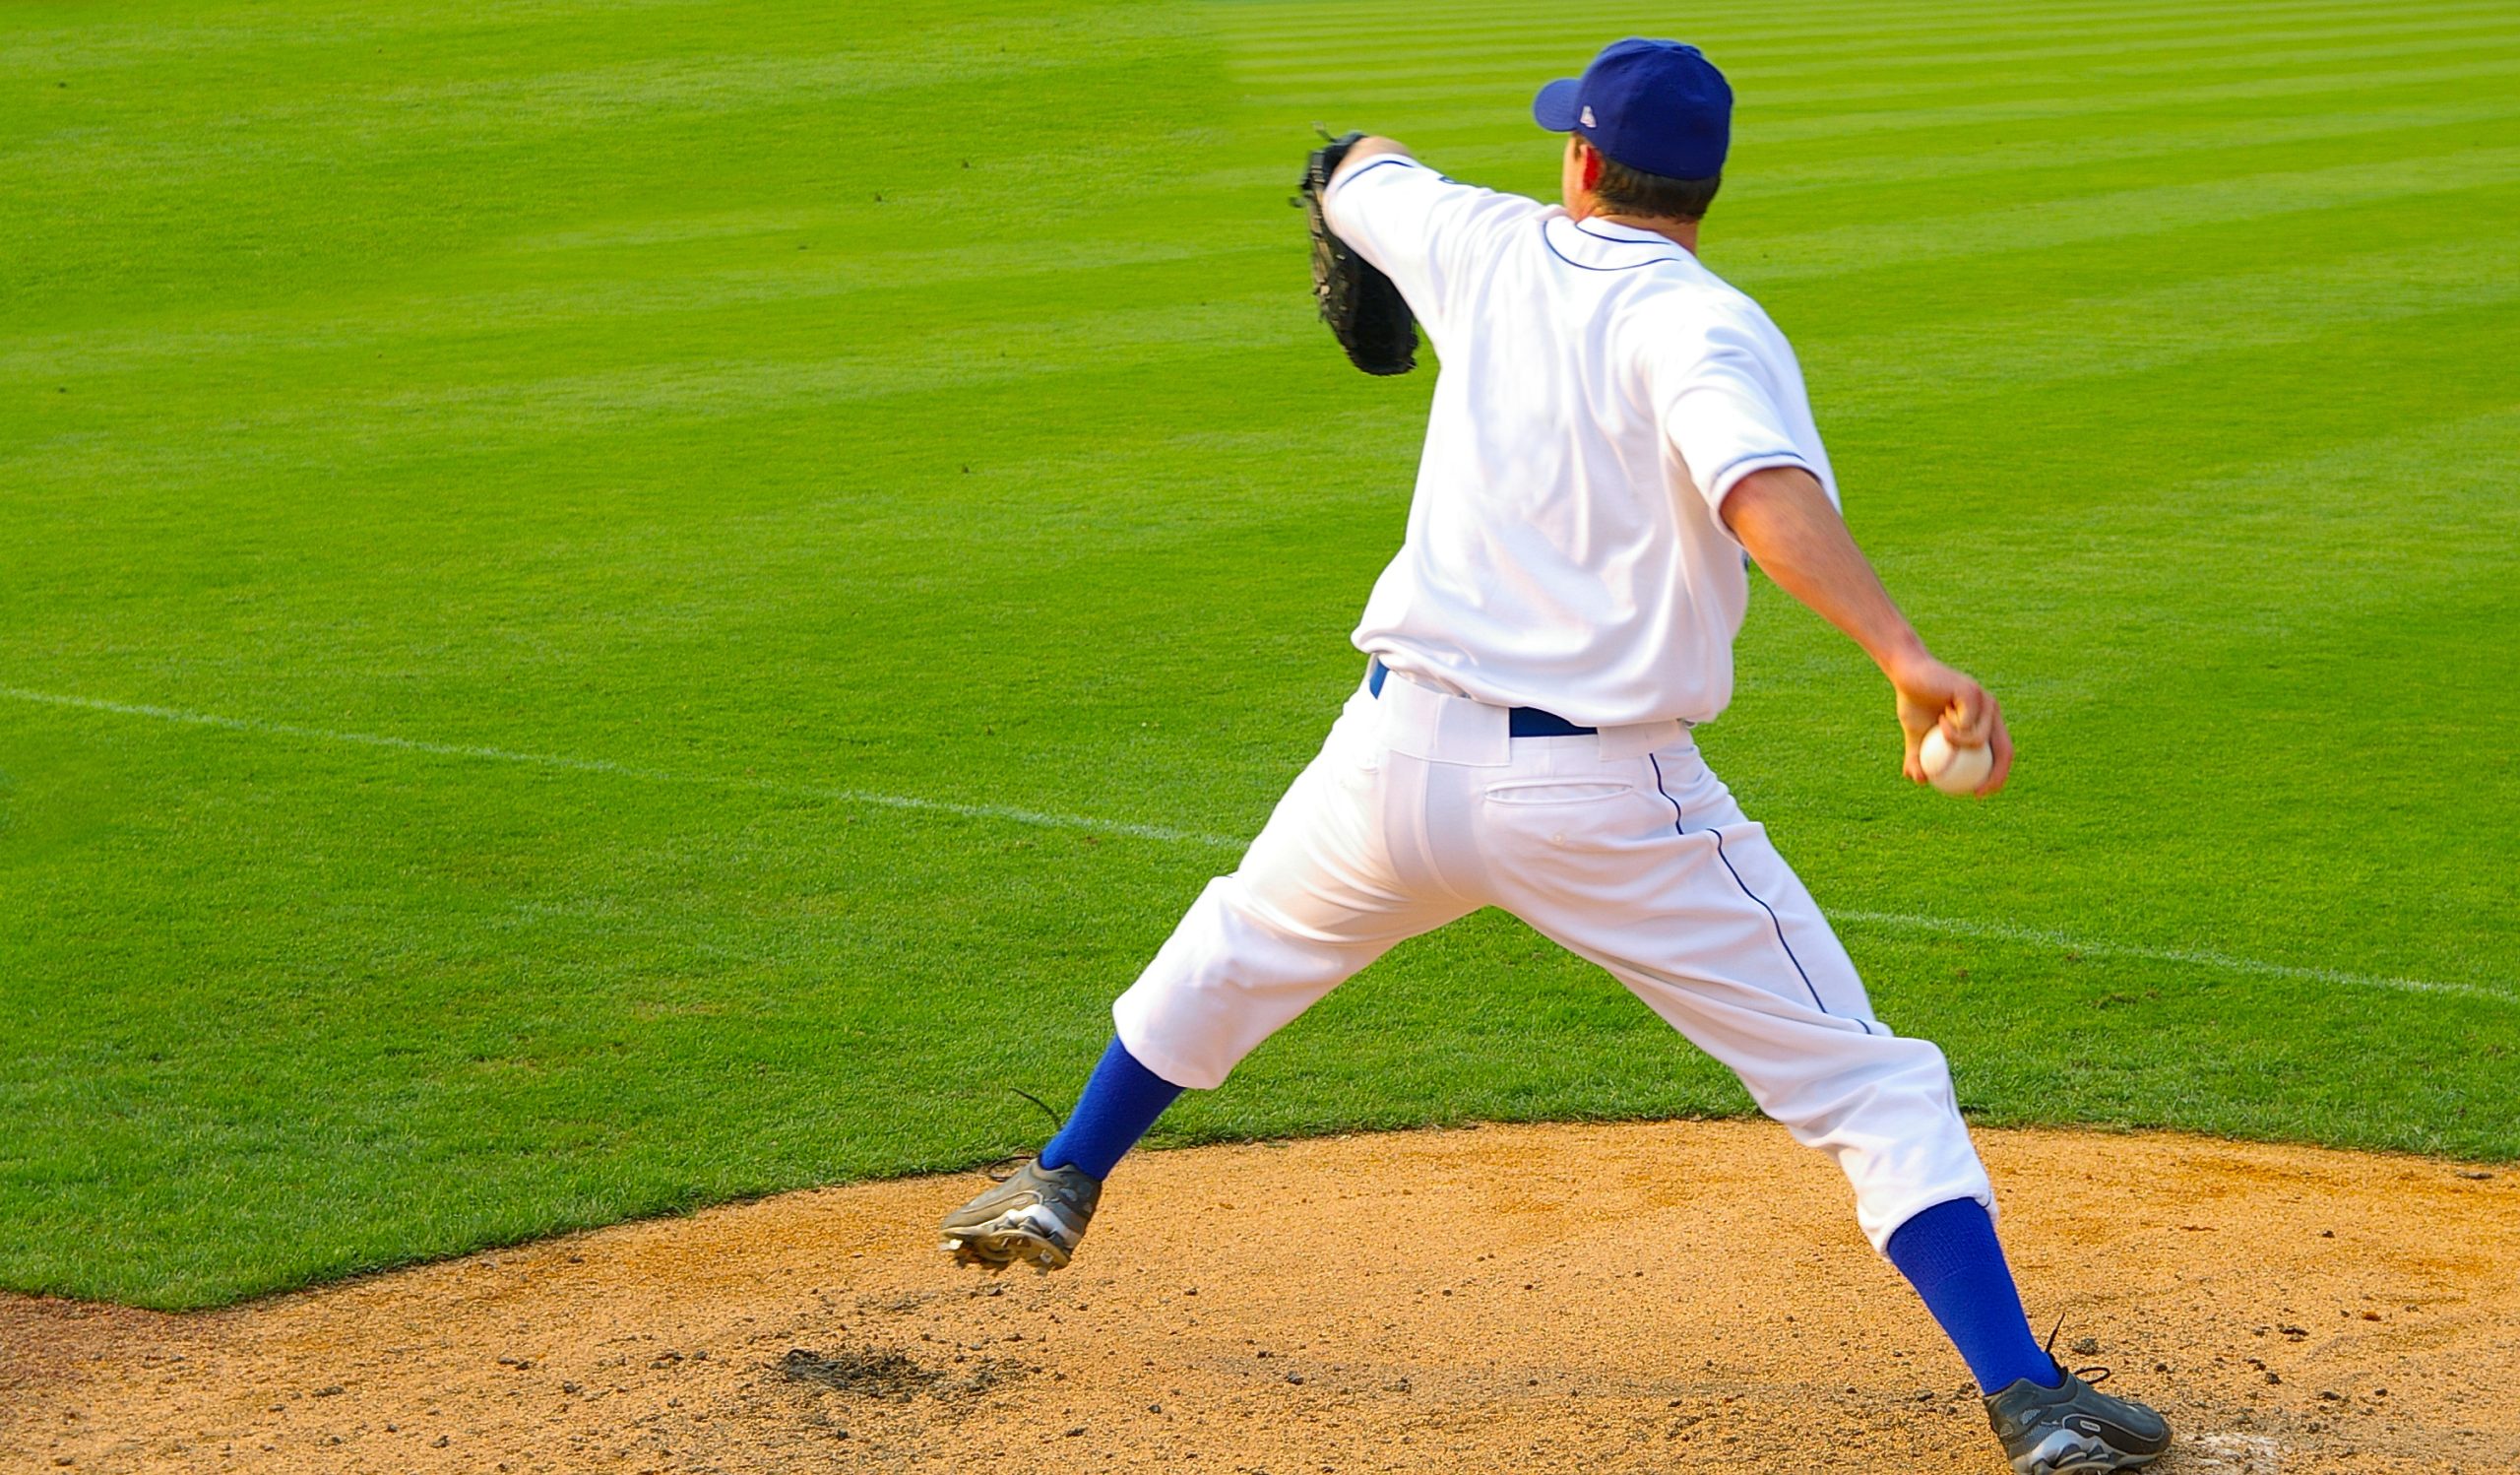 Professional baseball pitcher throwing the ball